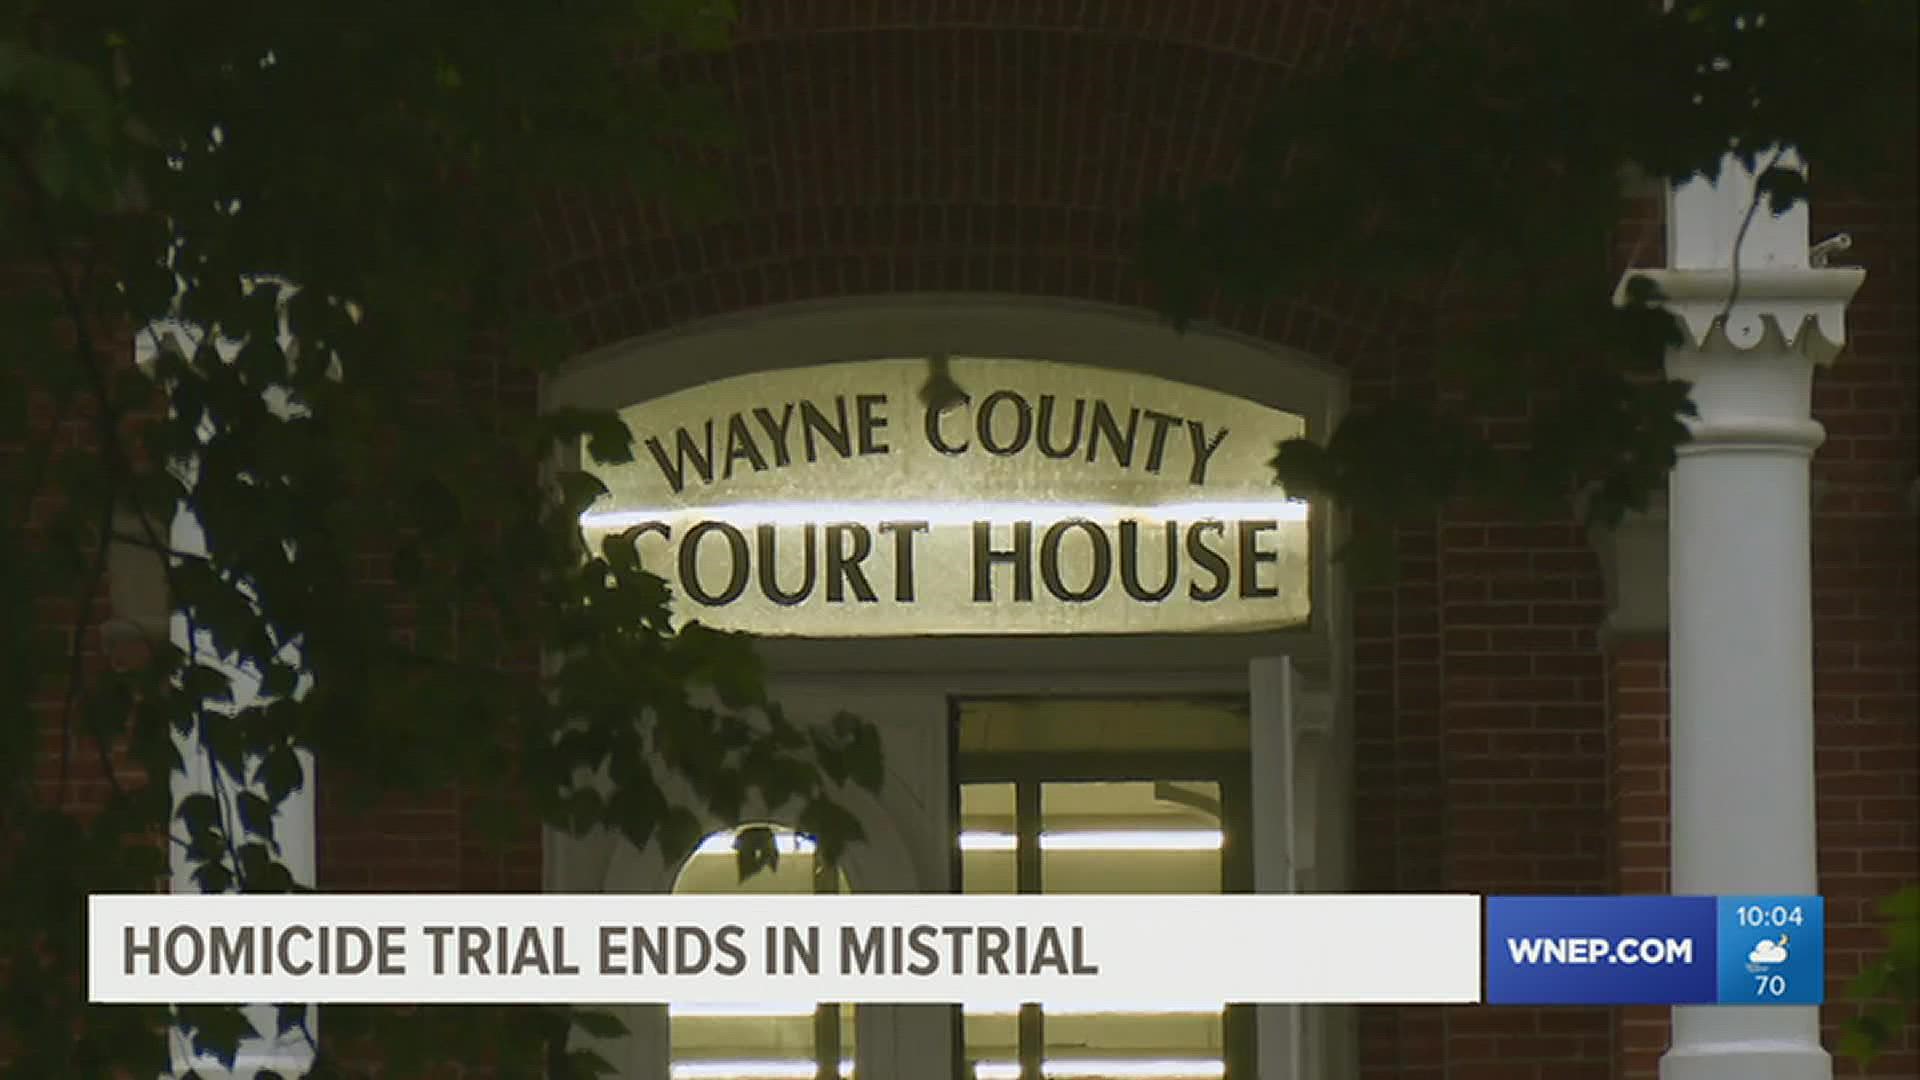 After three days on trial and roughly six hours of jury deliberation, jurors told the judge they were deadlocked and unable to come to a unanimous verdict.